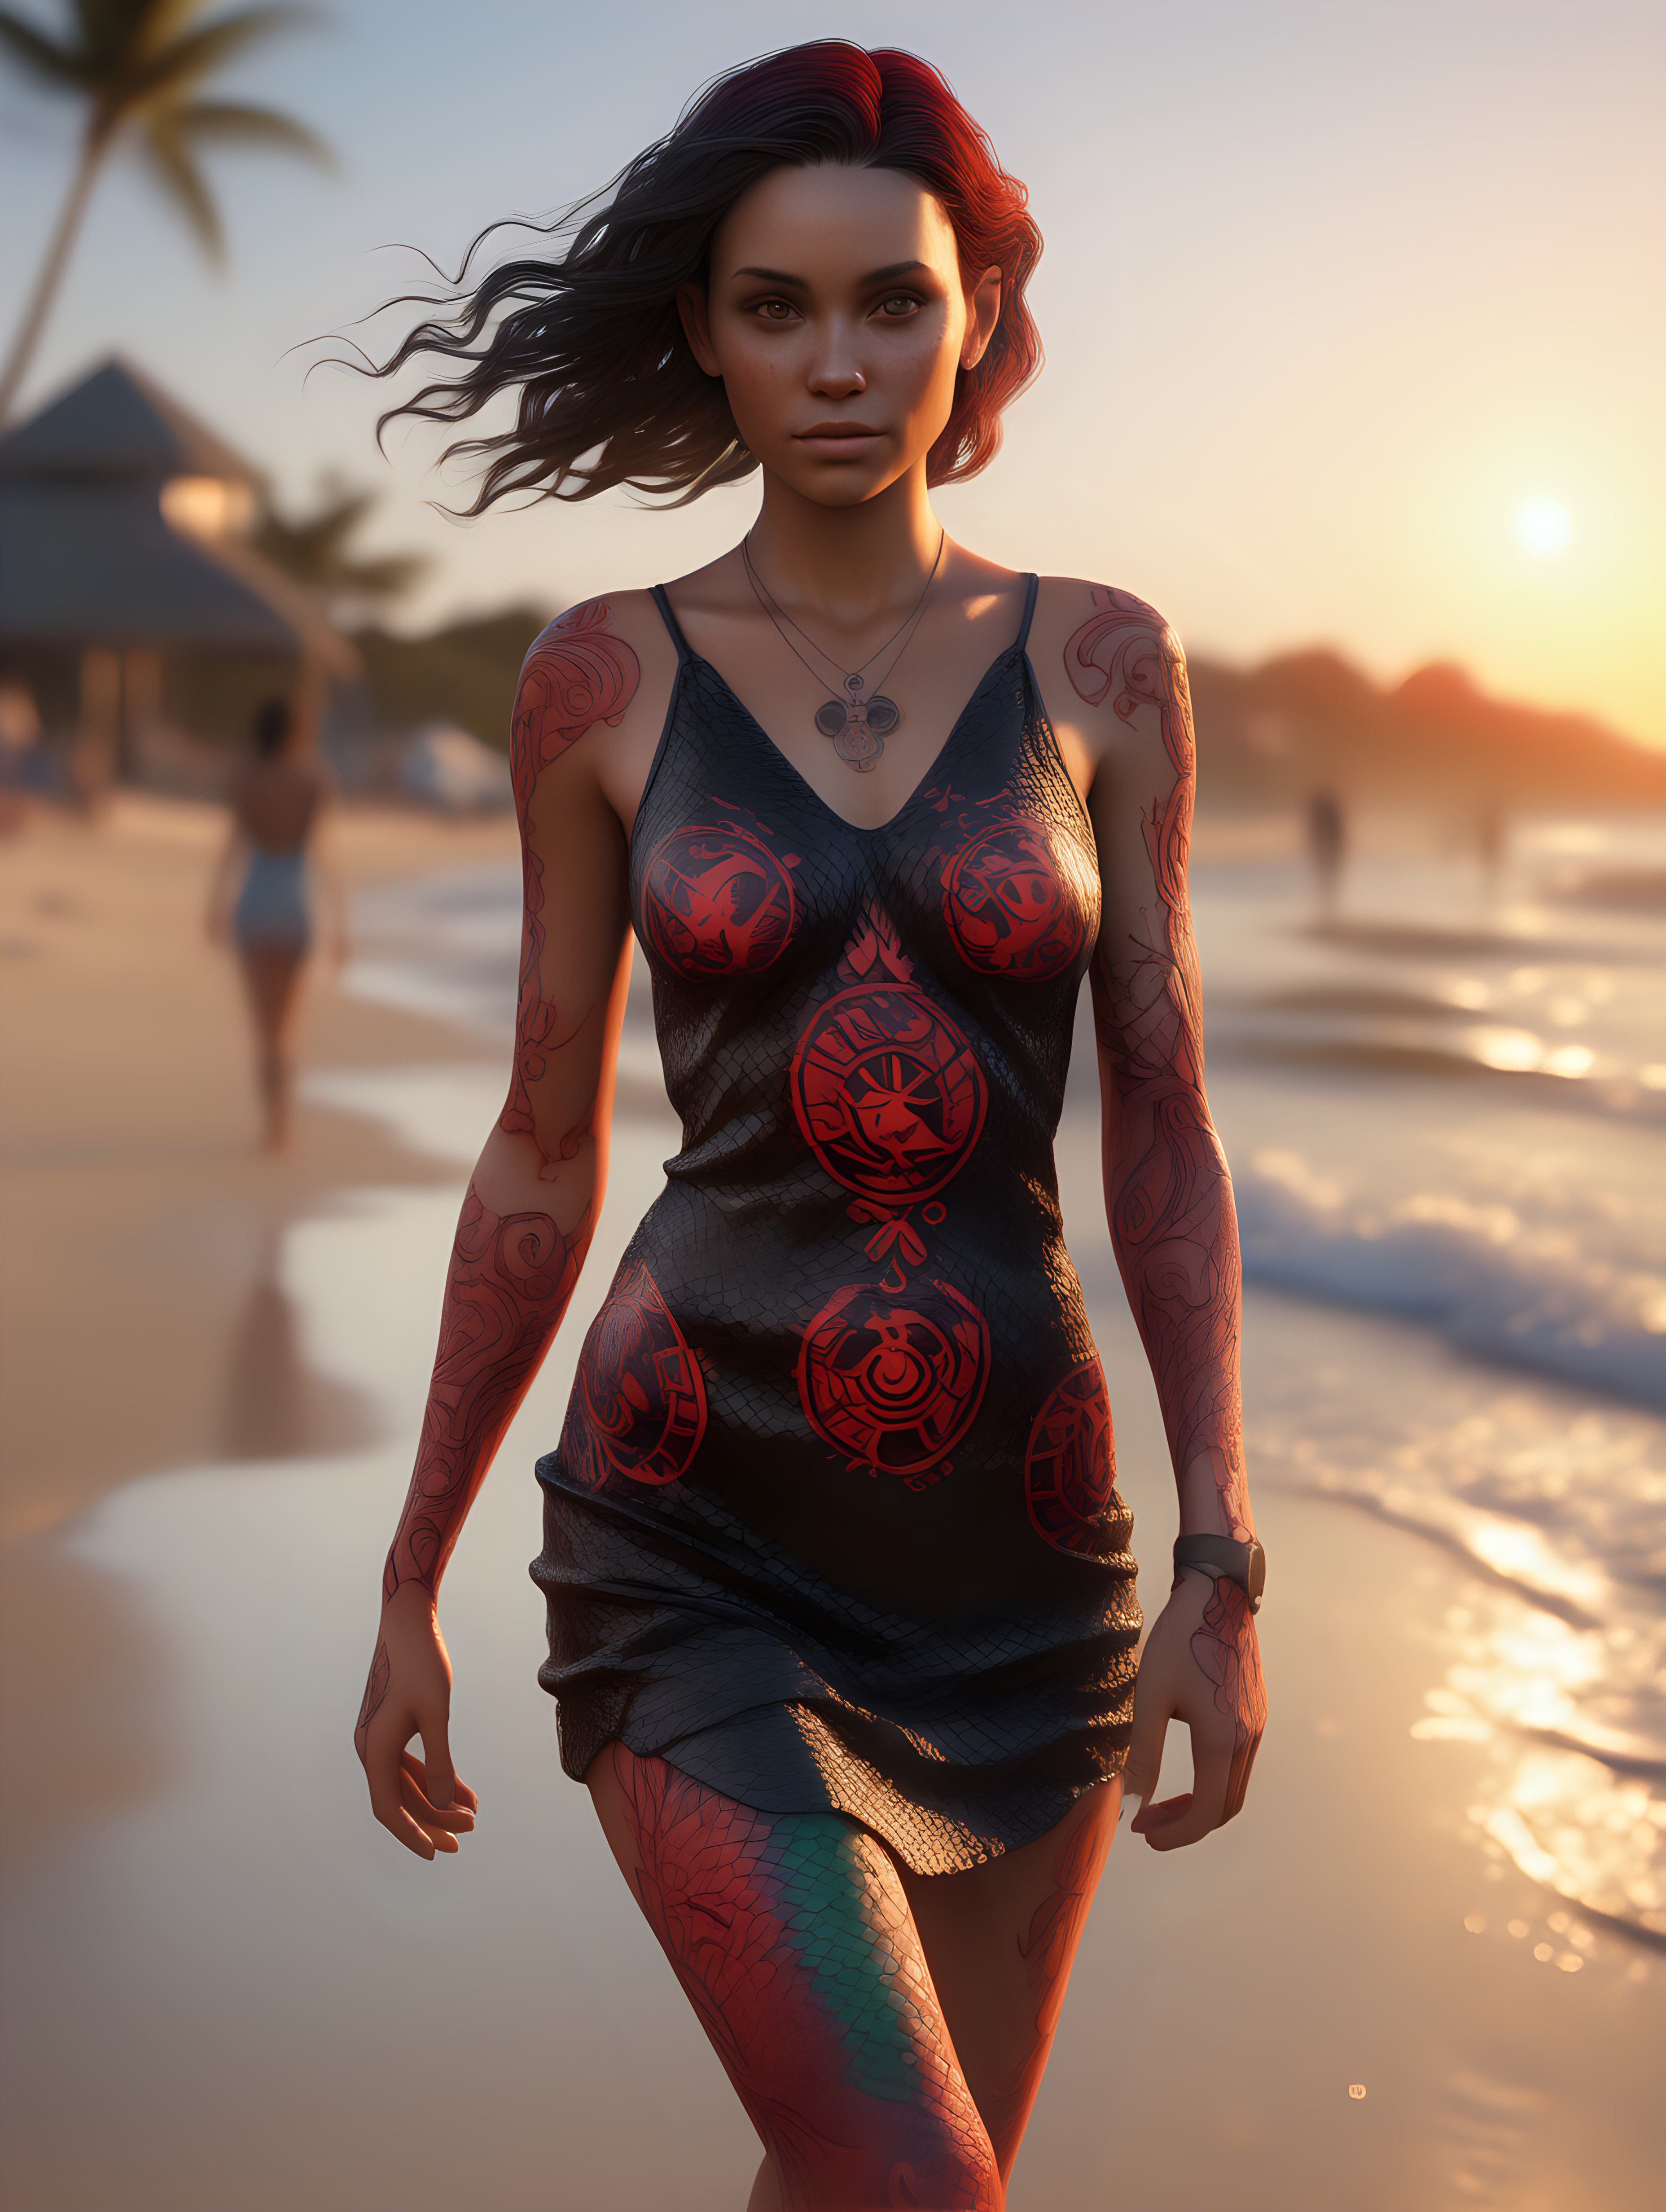 ultra-realistic high resolution and highly detailed photo of a female human, with black scales growing on her body, she has red draconic symbols carved into her arms and body, wearing a colourful transparent summer dress, walking in the sunset on a beach facing the camera